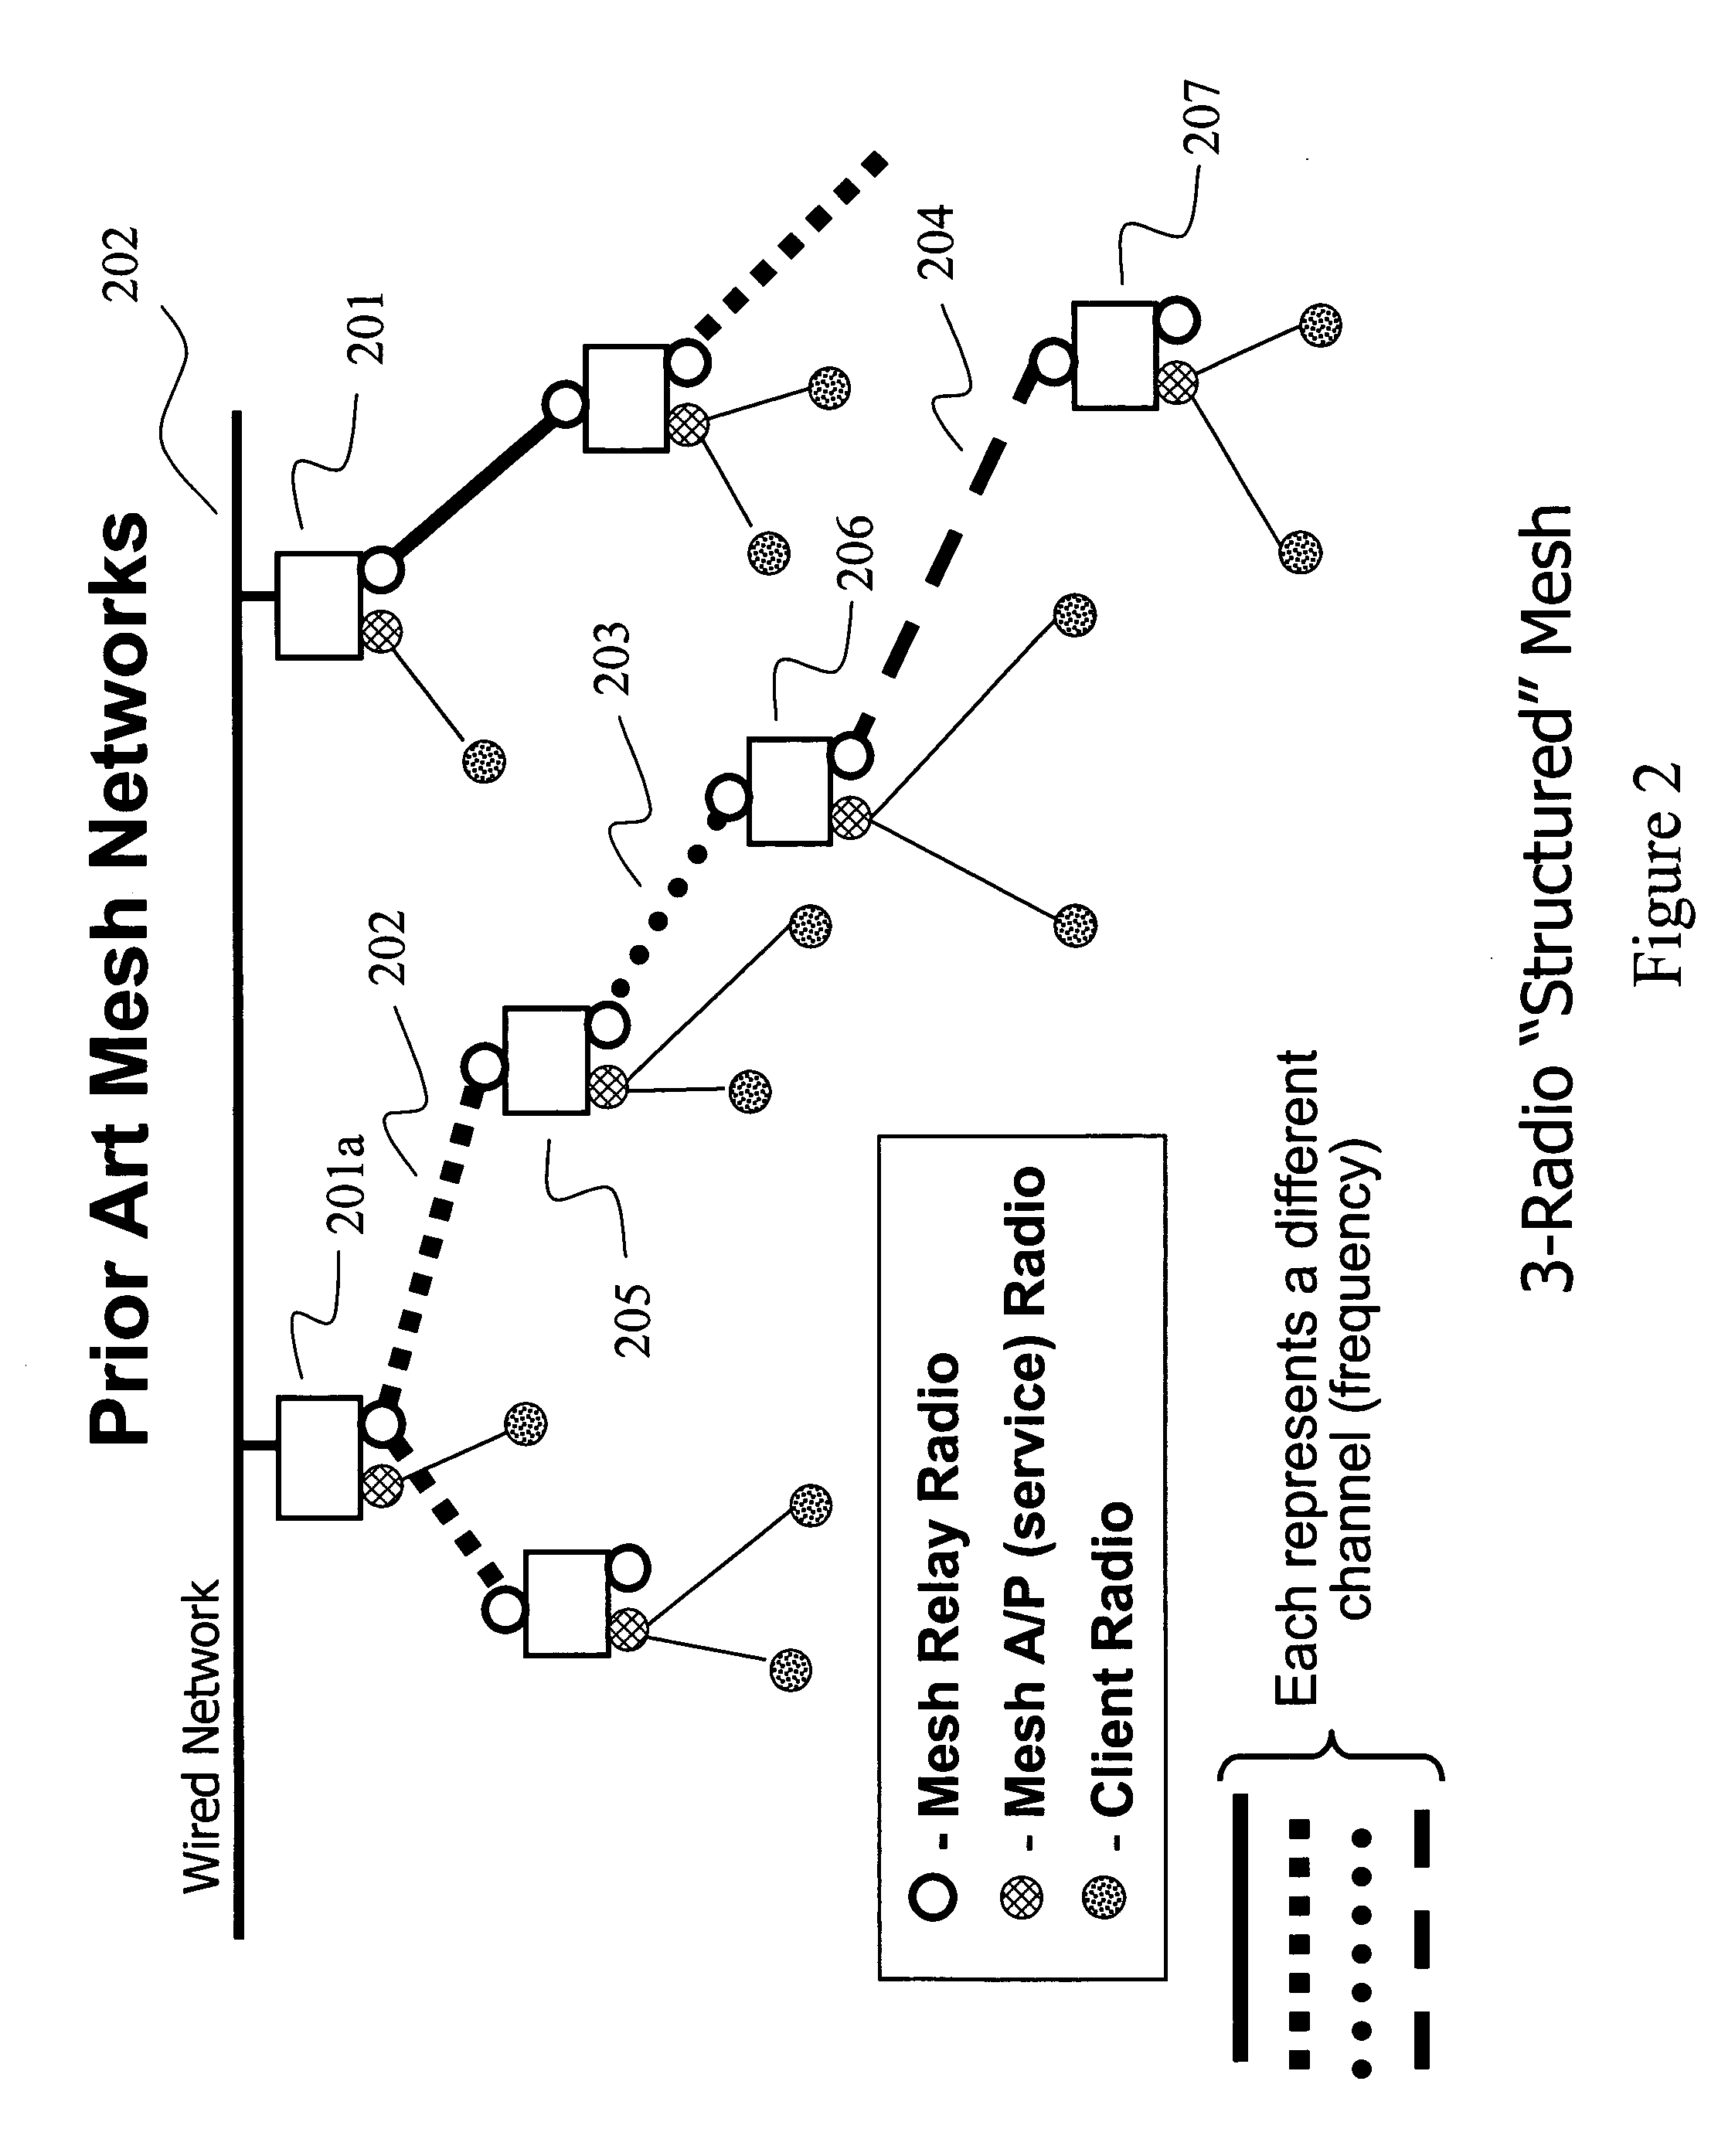 Combined directional and mobile interleaved wireless mesh network